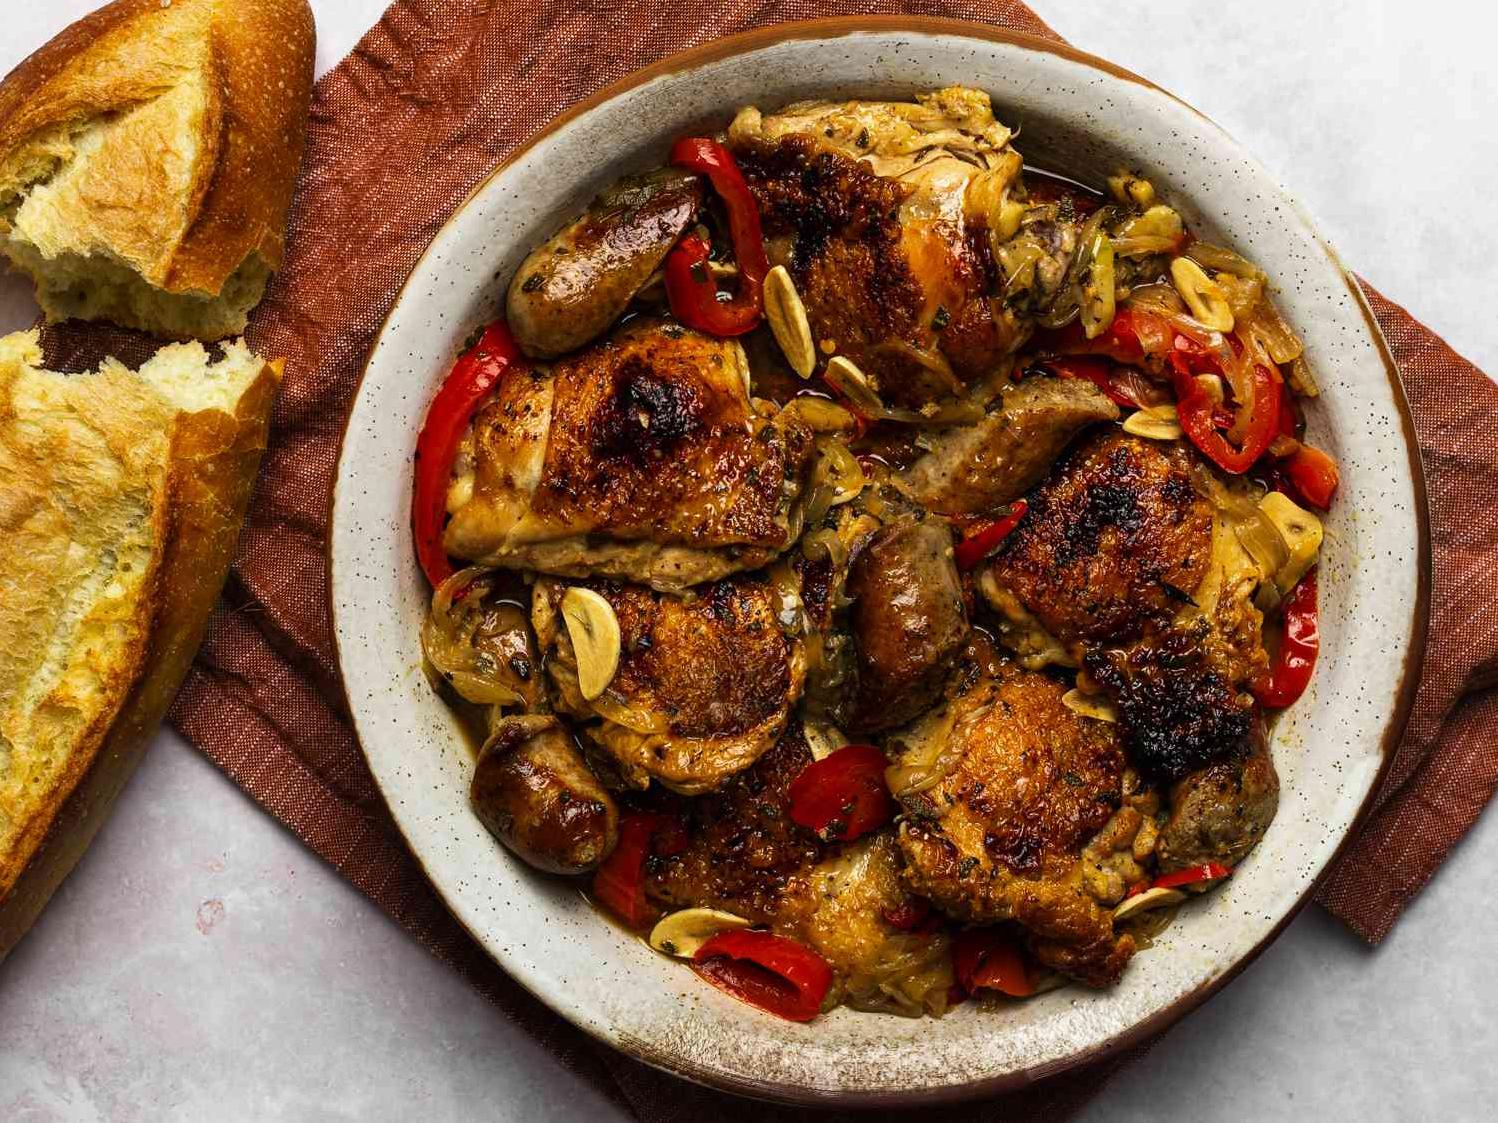  Chicken and sausage with wine, because everything tastes better with wine!